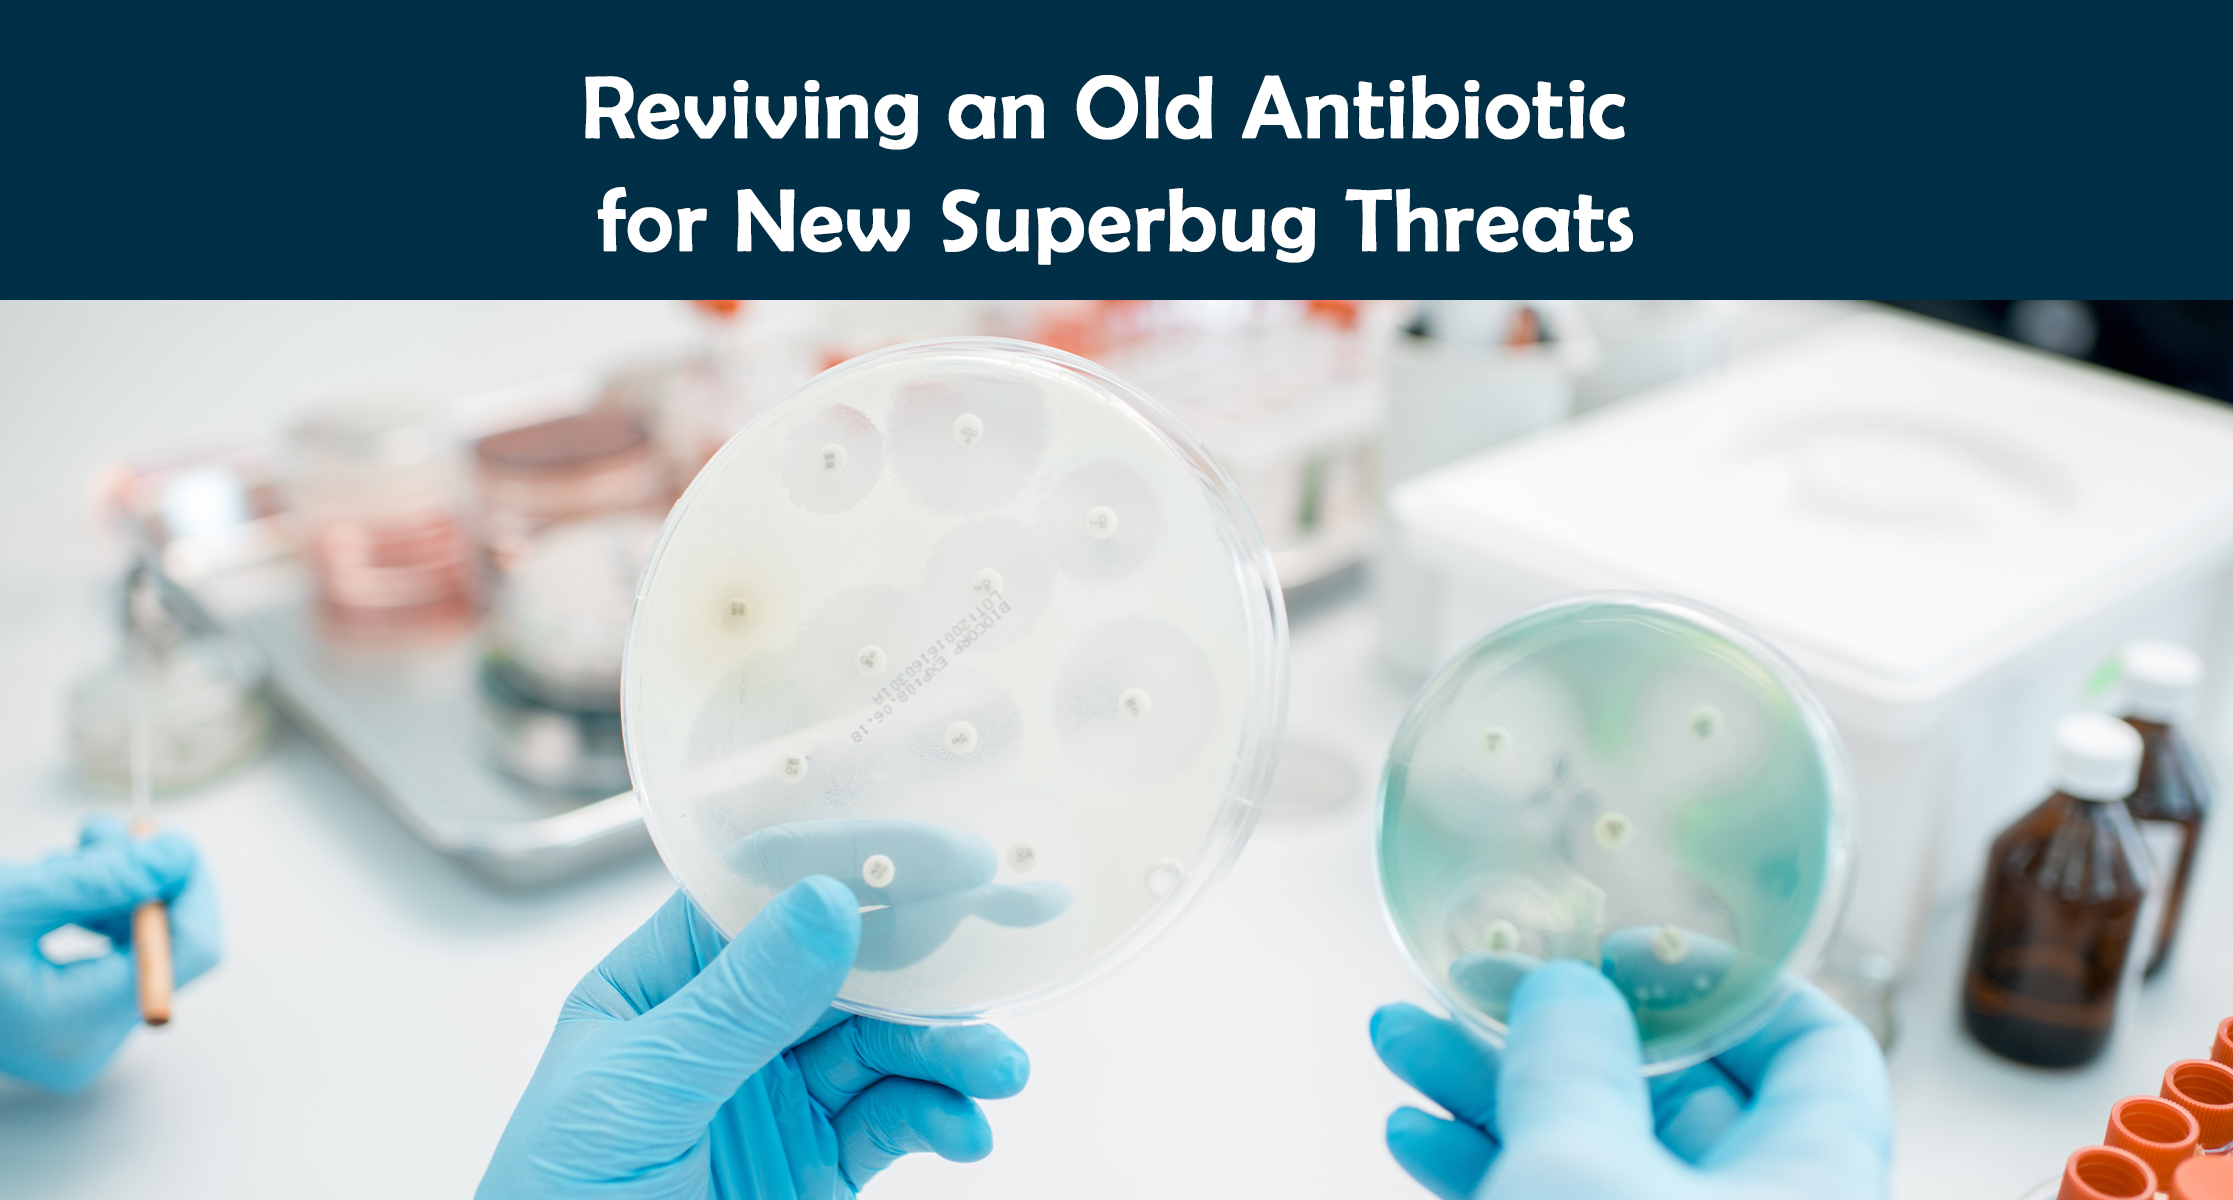 Reviving an Old Antibiotic for New Superbug Threats